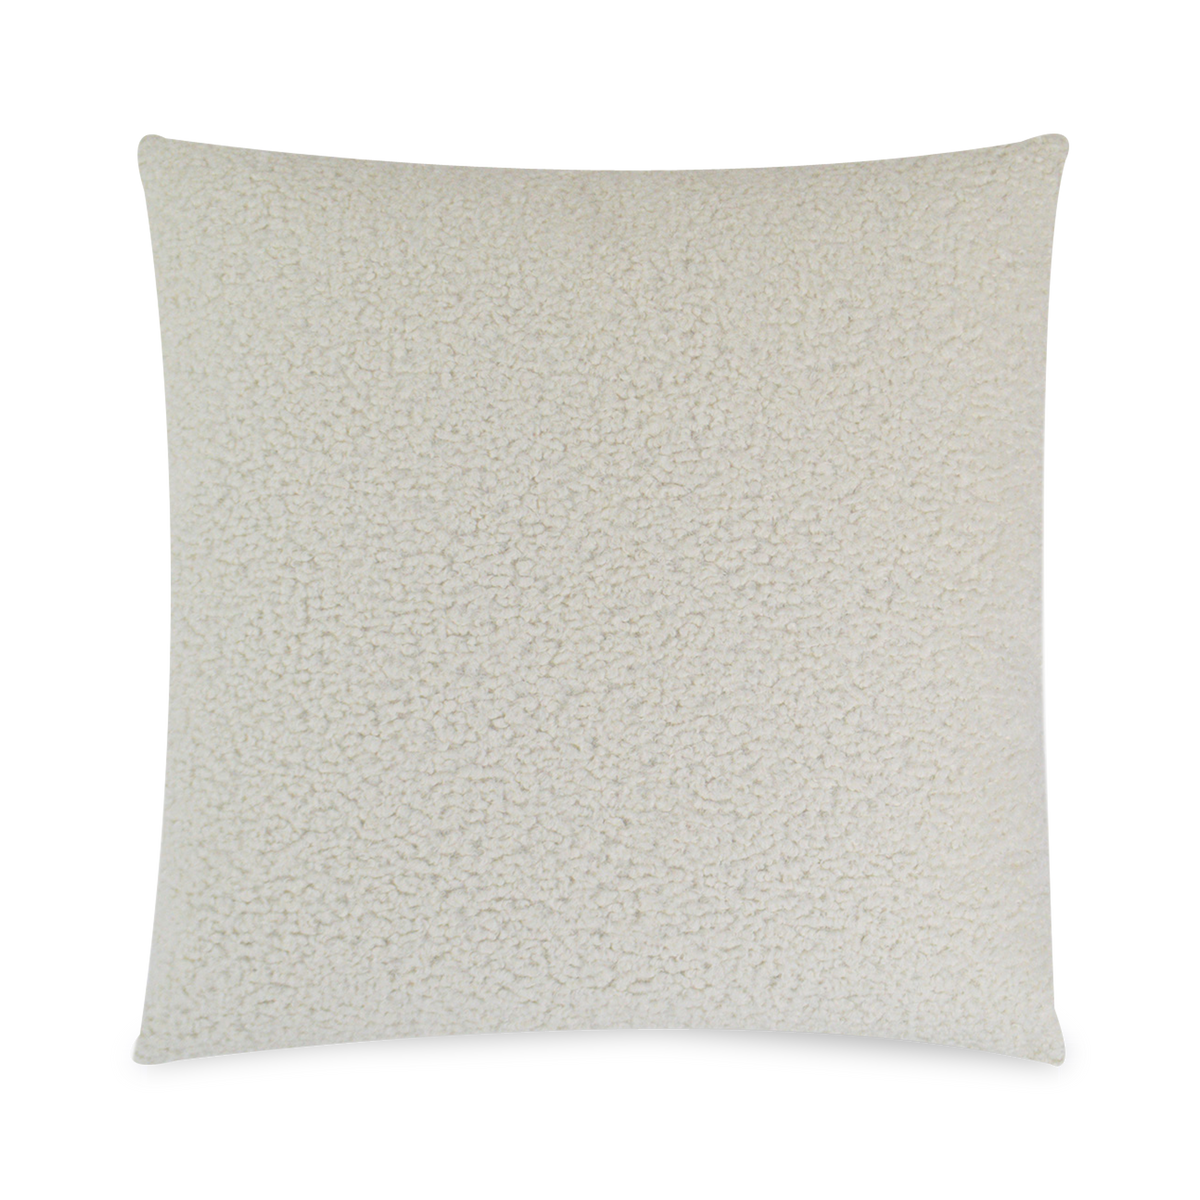 This ivory textured throw pillow features a soft to the touch fabric, with fur like details.